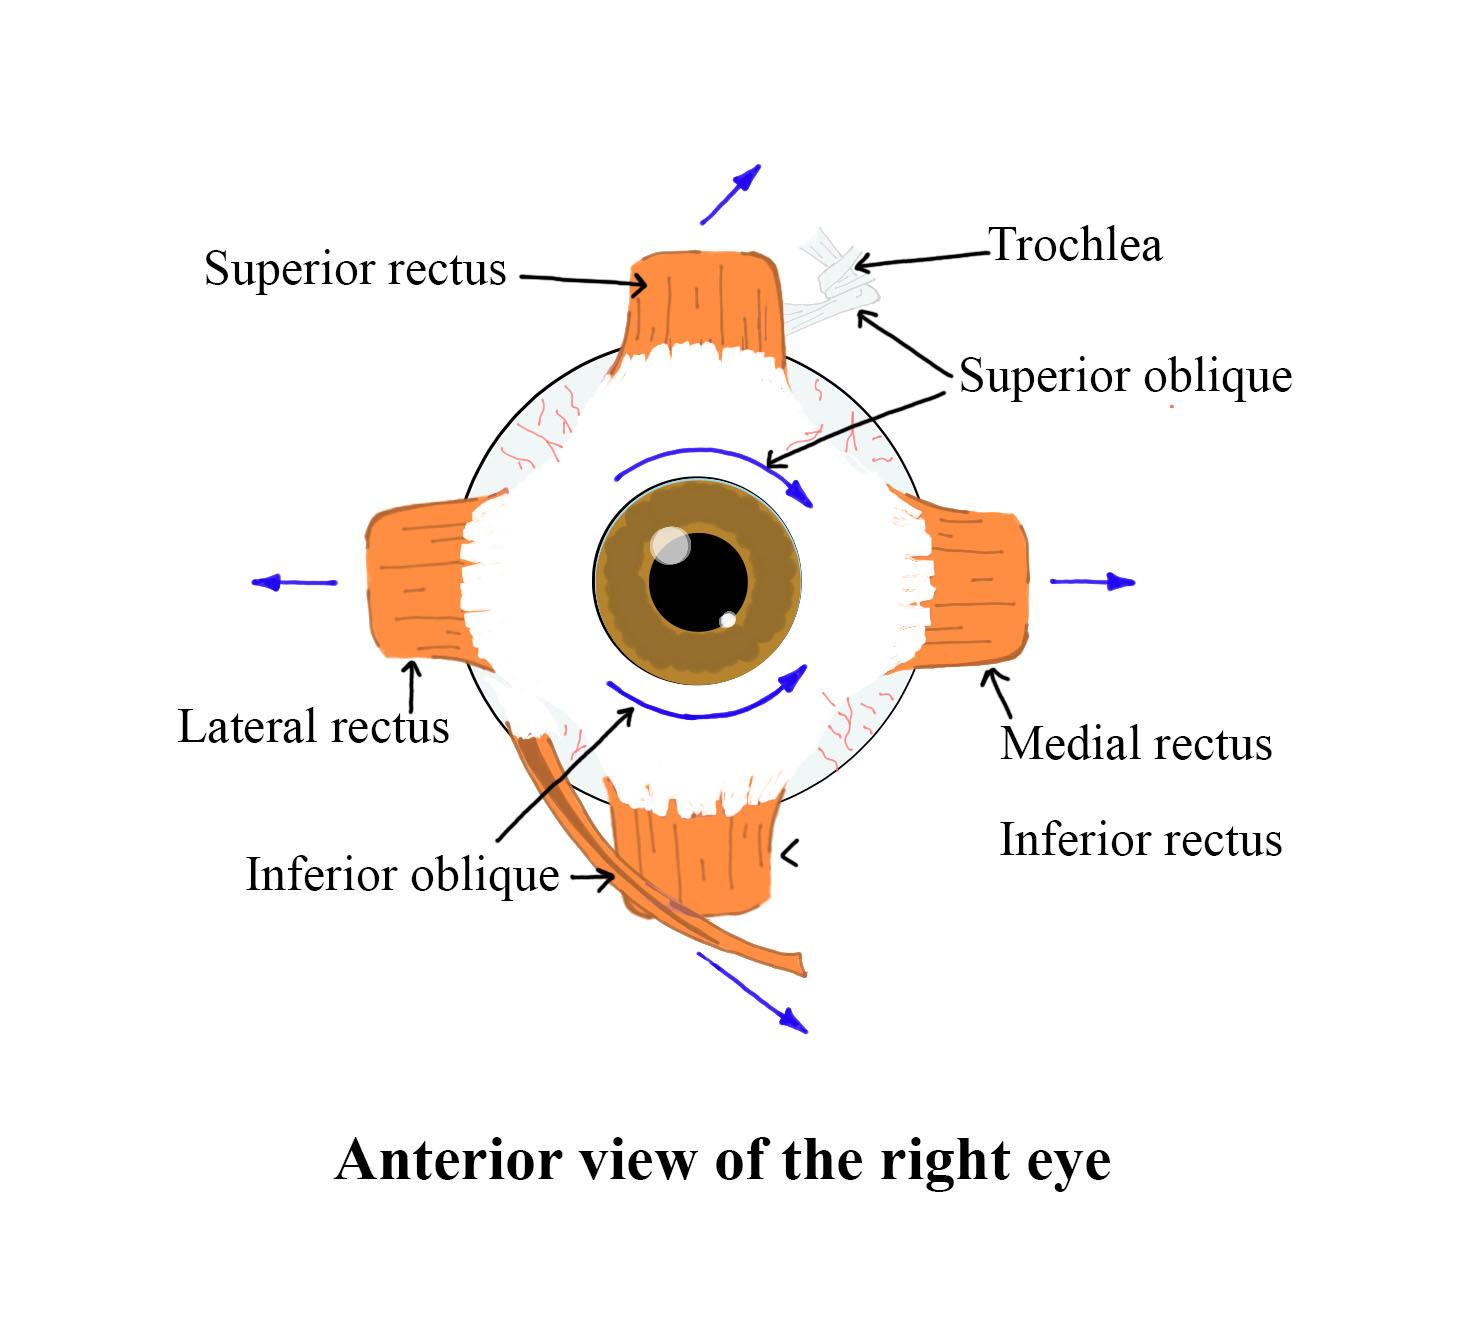 The Eye Rotates In The Orbit By A6 Musclesb3 Musclesc4 Musclesd